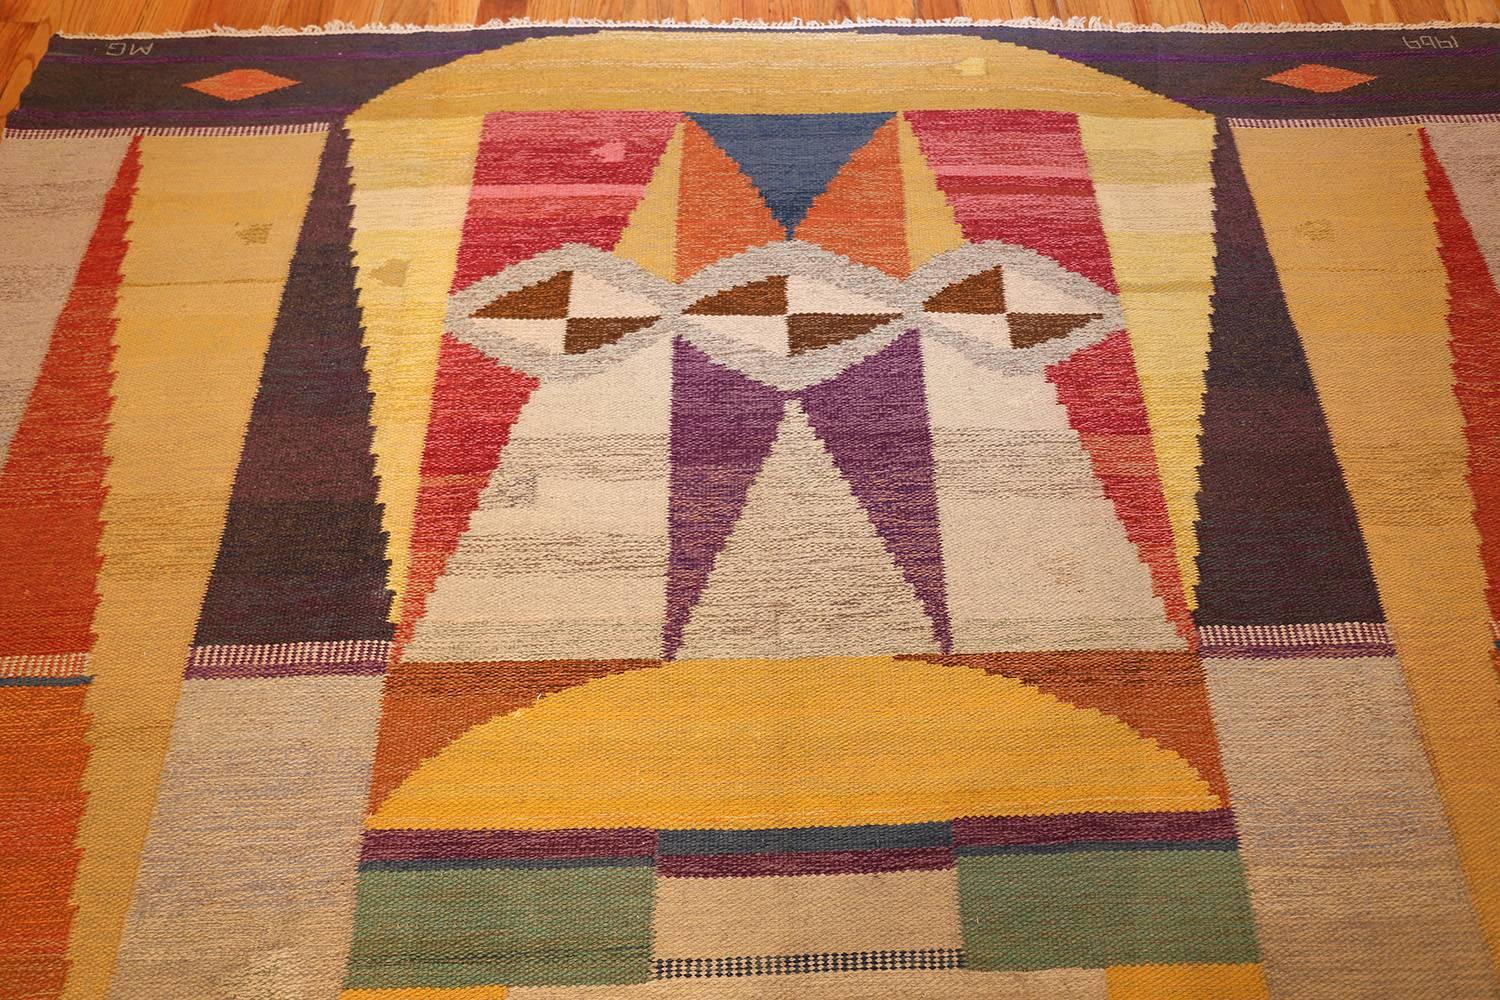 Beautiful and colorful Scandinavian Swedish Kilim rug dated 1969 Signed MG 49267, country of origin / rug type: Scandinavian rug, Date: circa 1969.

Scandinavian rugs – Scandinavia is known for their Rya and Rollakan Scandinavian rugs. Named after